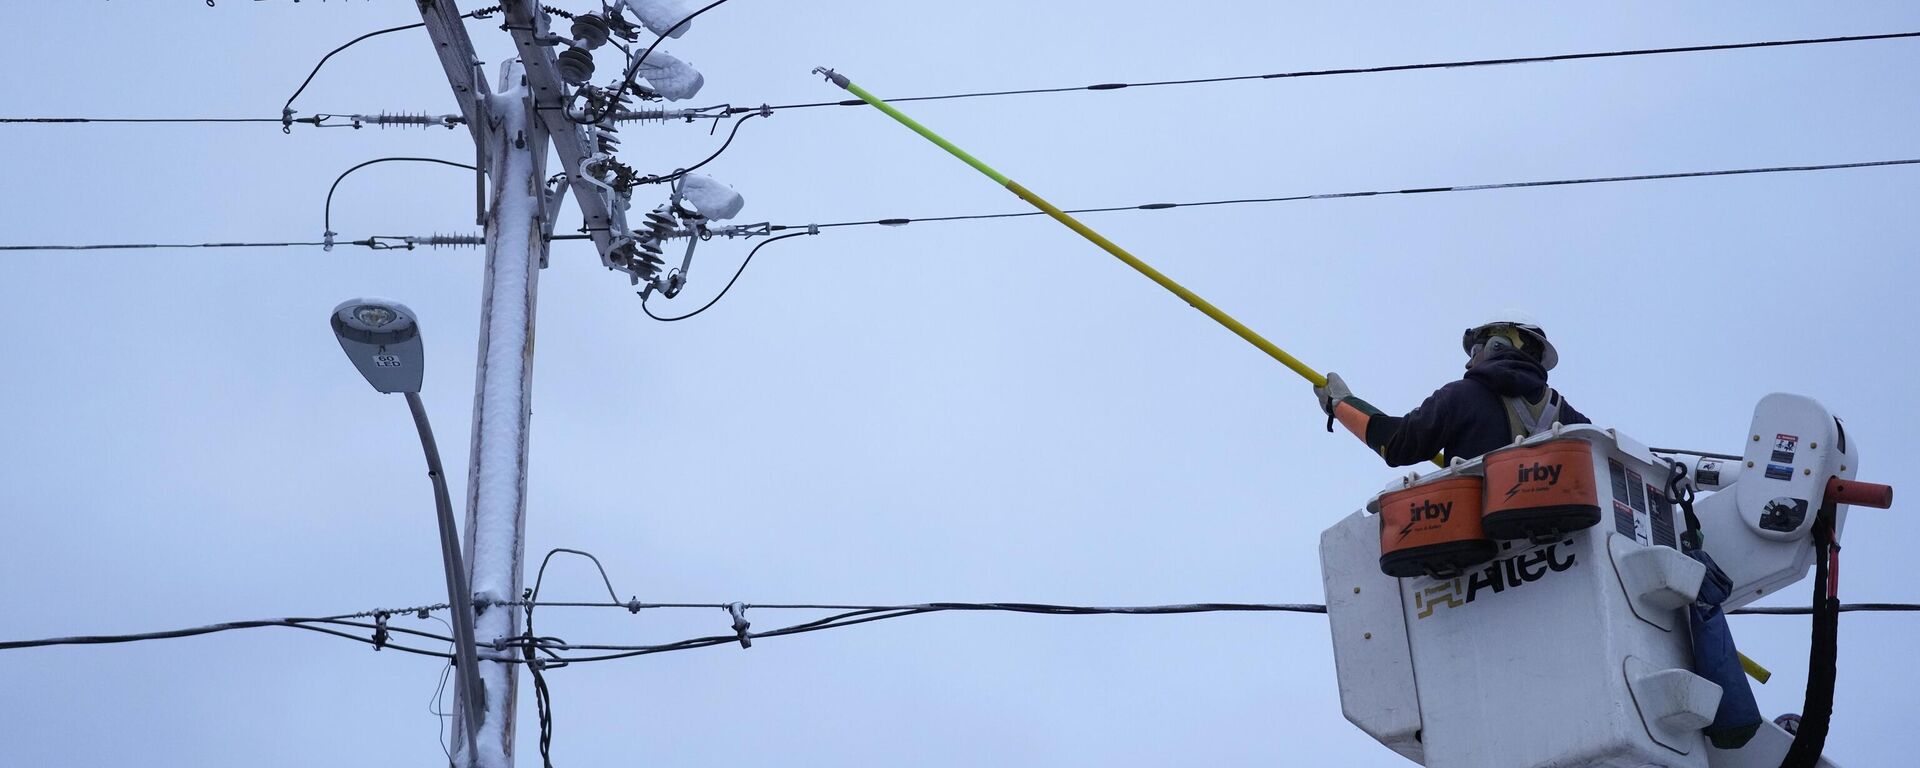 Central Maine Power Co. lineman John Baril works to restore electricity, Wednesday, March 15, 2023, in Lewiston, Maine. A late-winter storm dumped heavy, wet snow on parts of the Northeast, causing tens of thousands of power outages. - Sputnik International, 1920, 18.06.2023